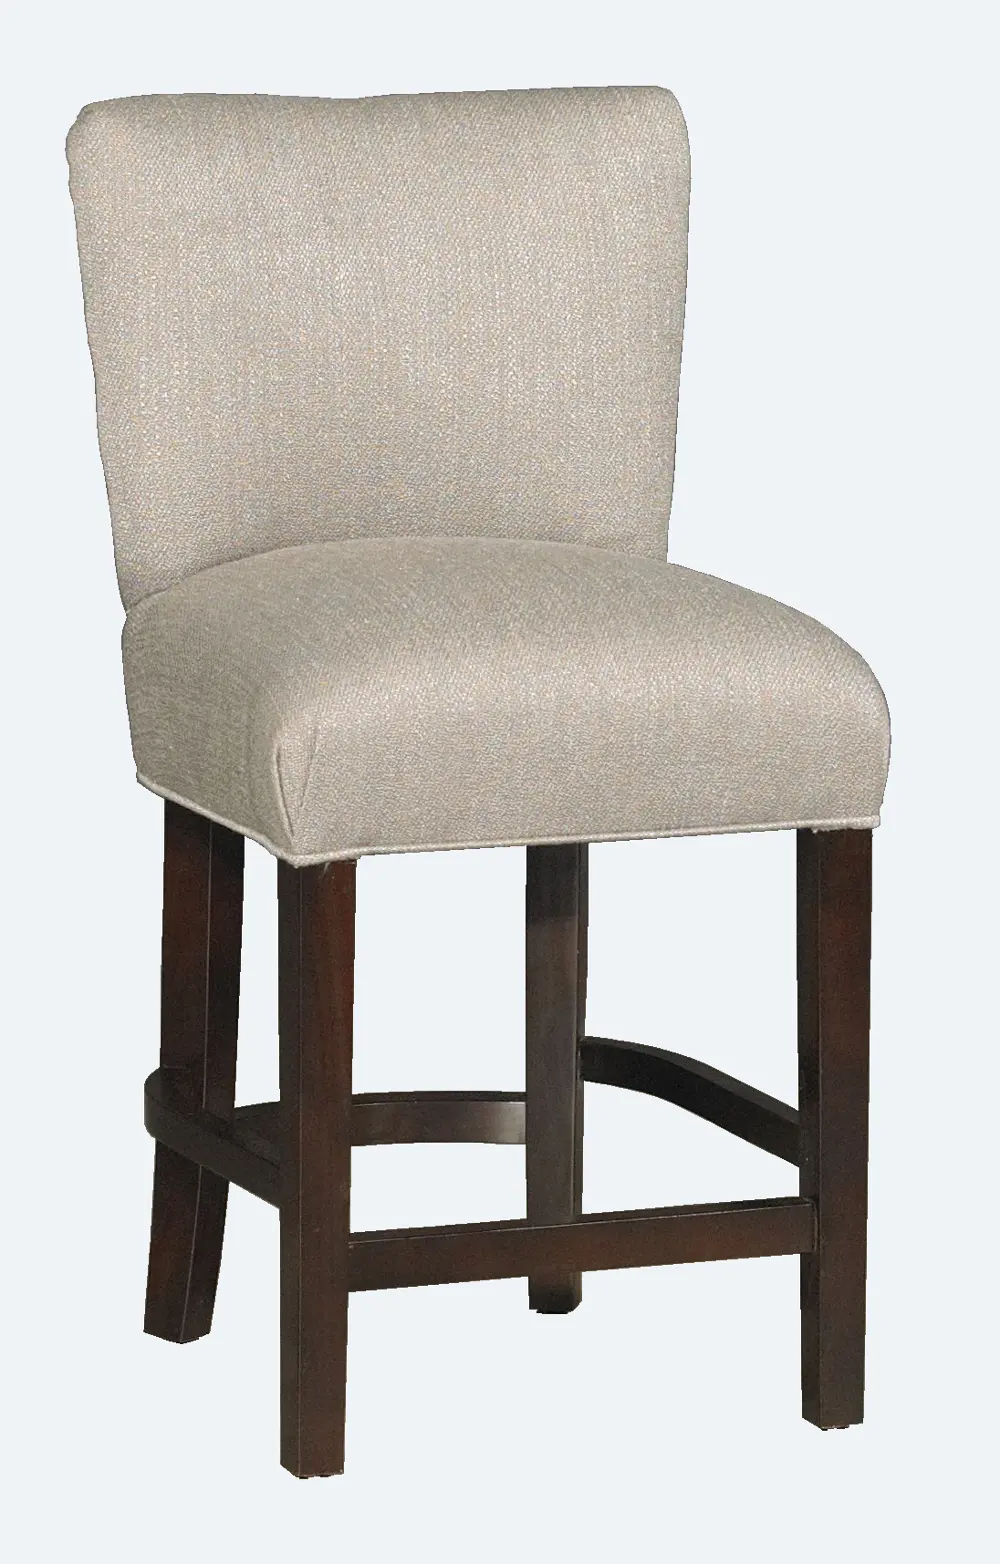 Mineral and Espresso 24 Inch Bar Stool - Savannah Collection-1